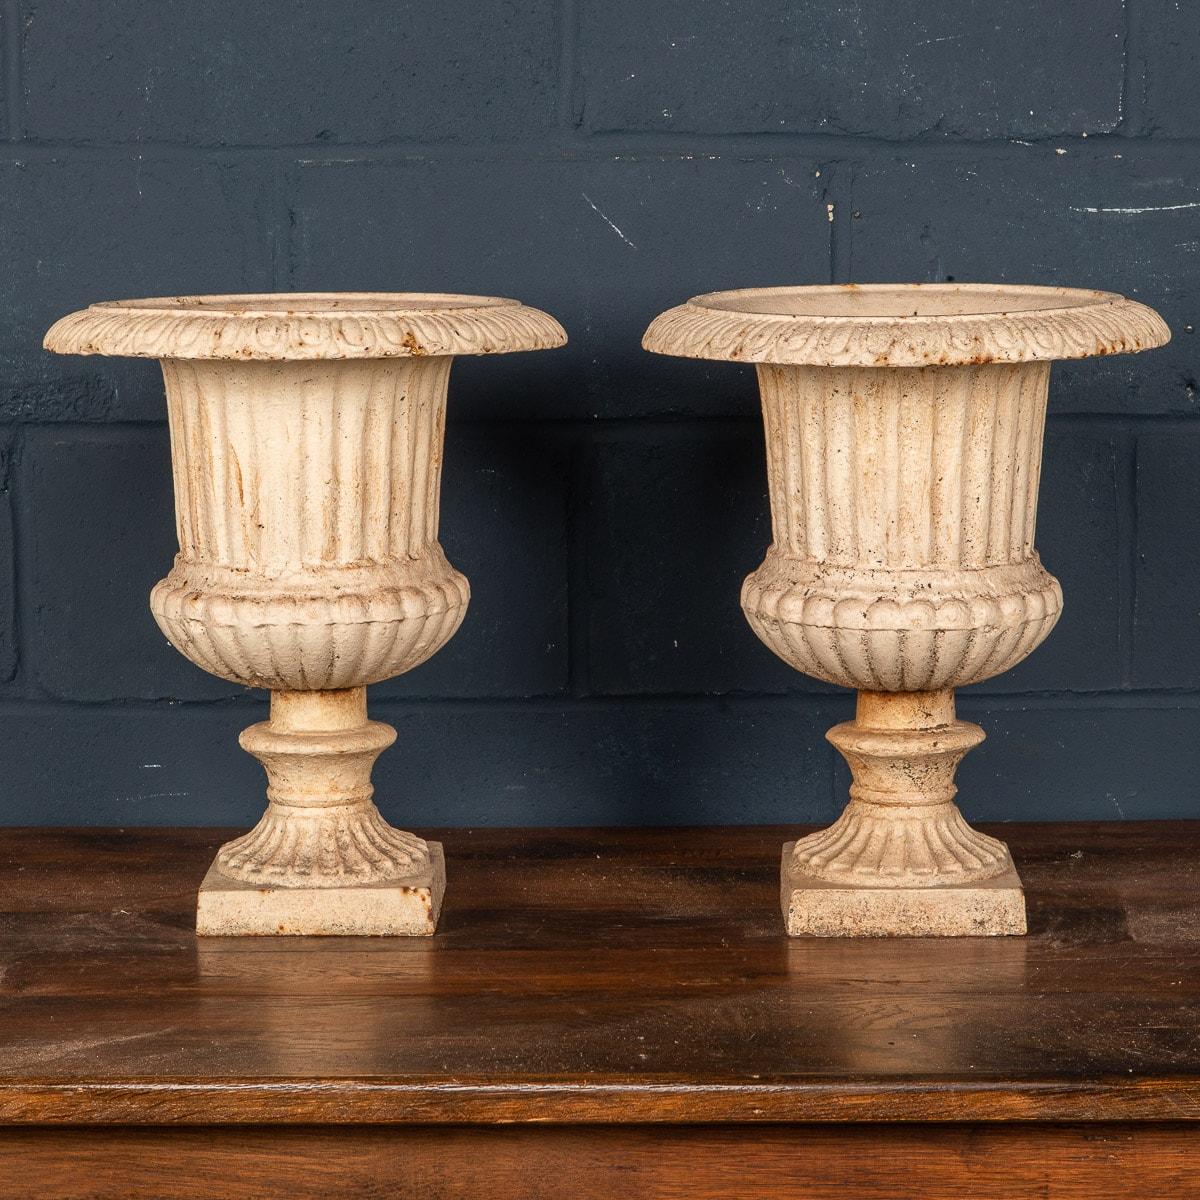 A large pair of late Edwardian English cast iron garden urns dating to the early part of the 20th Century. Of neoclassical shape, they are in lovely condition, repainted over the years which merely adds their character and charm.

Condition
In